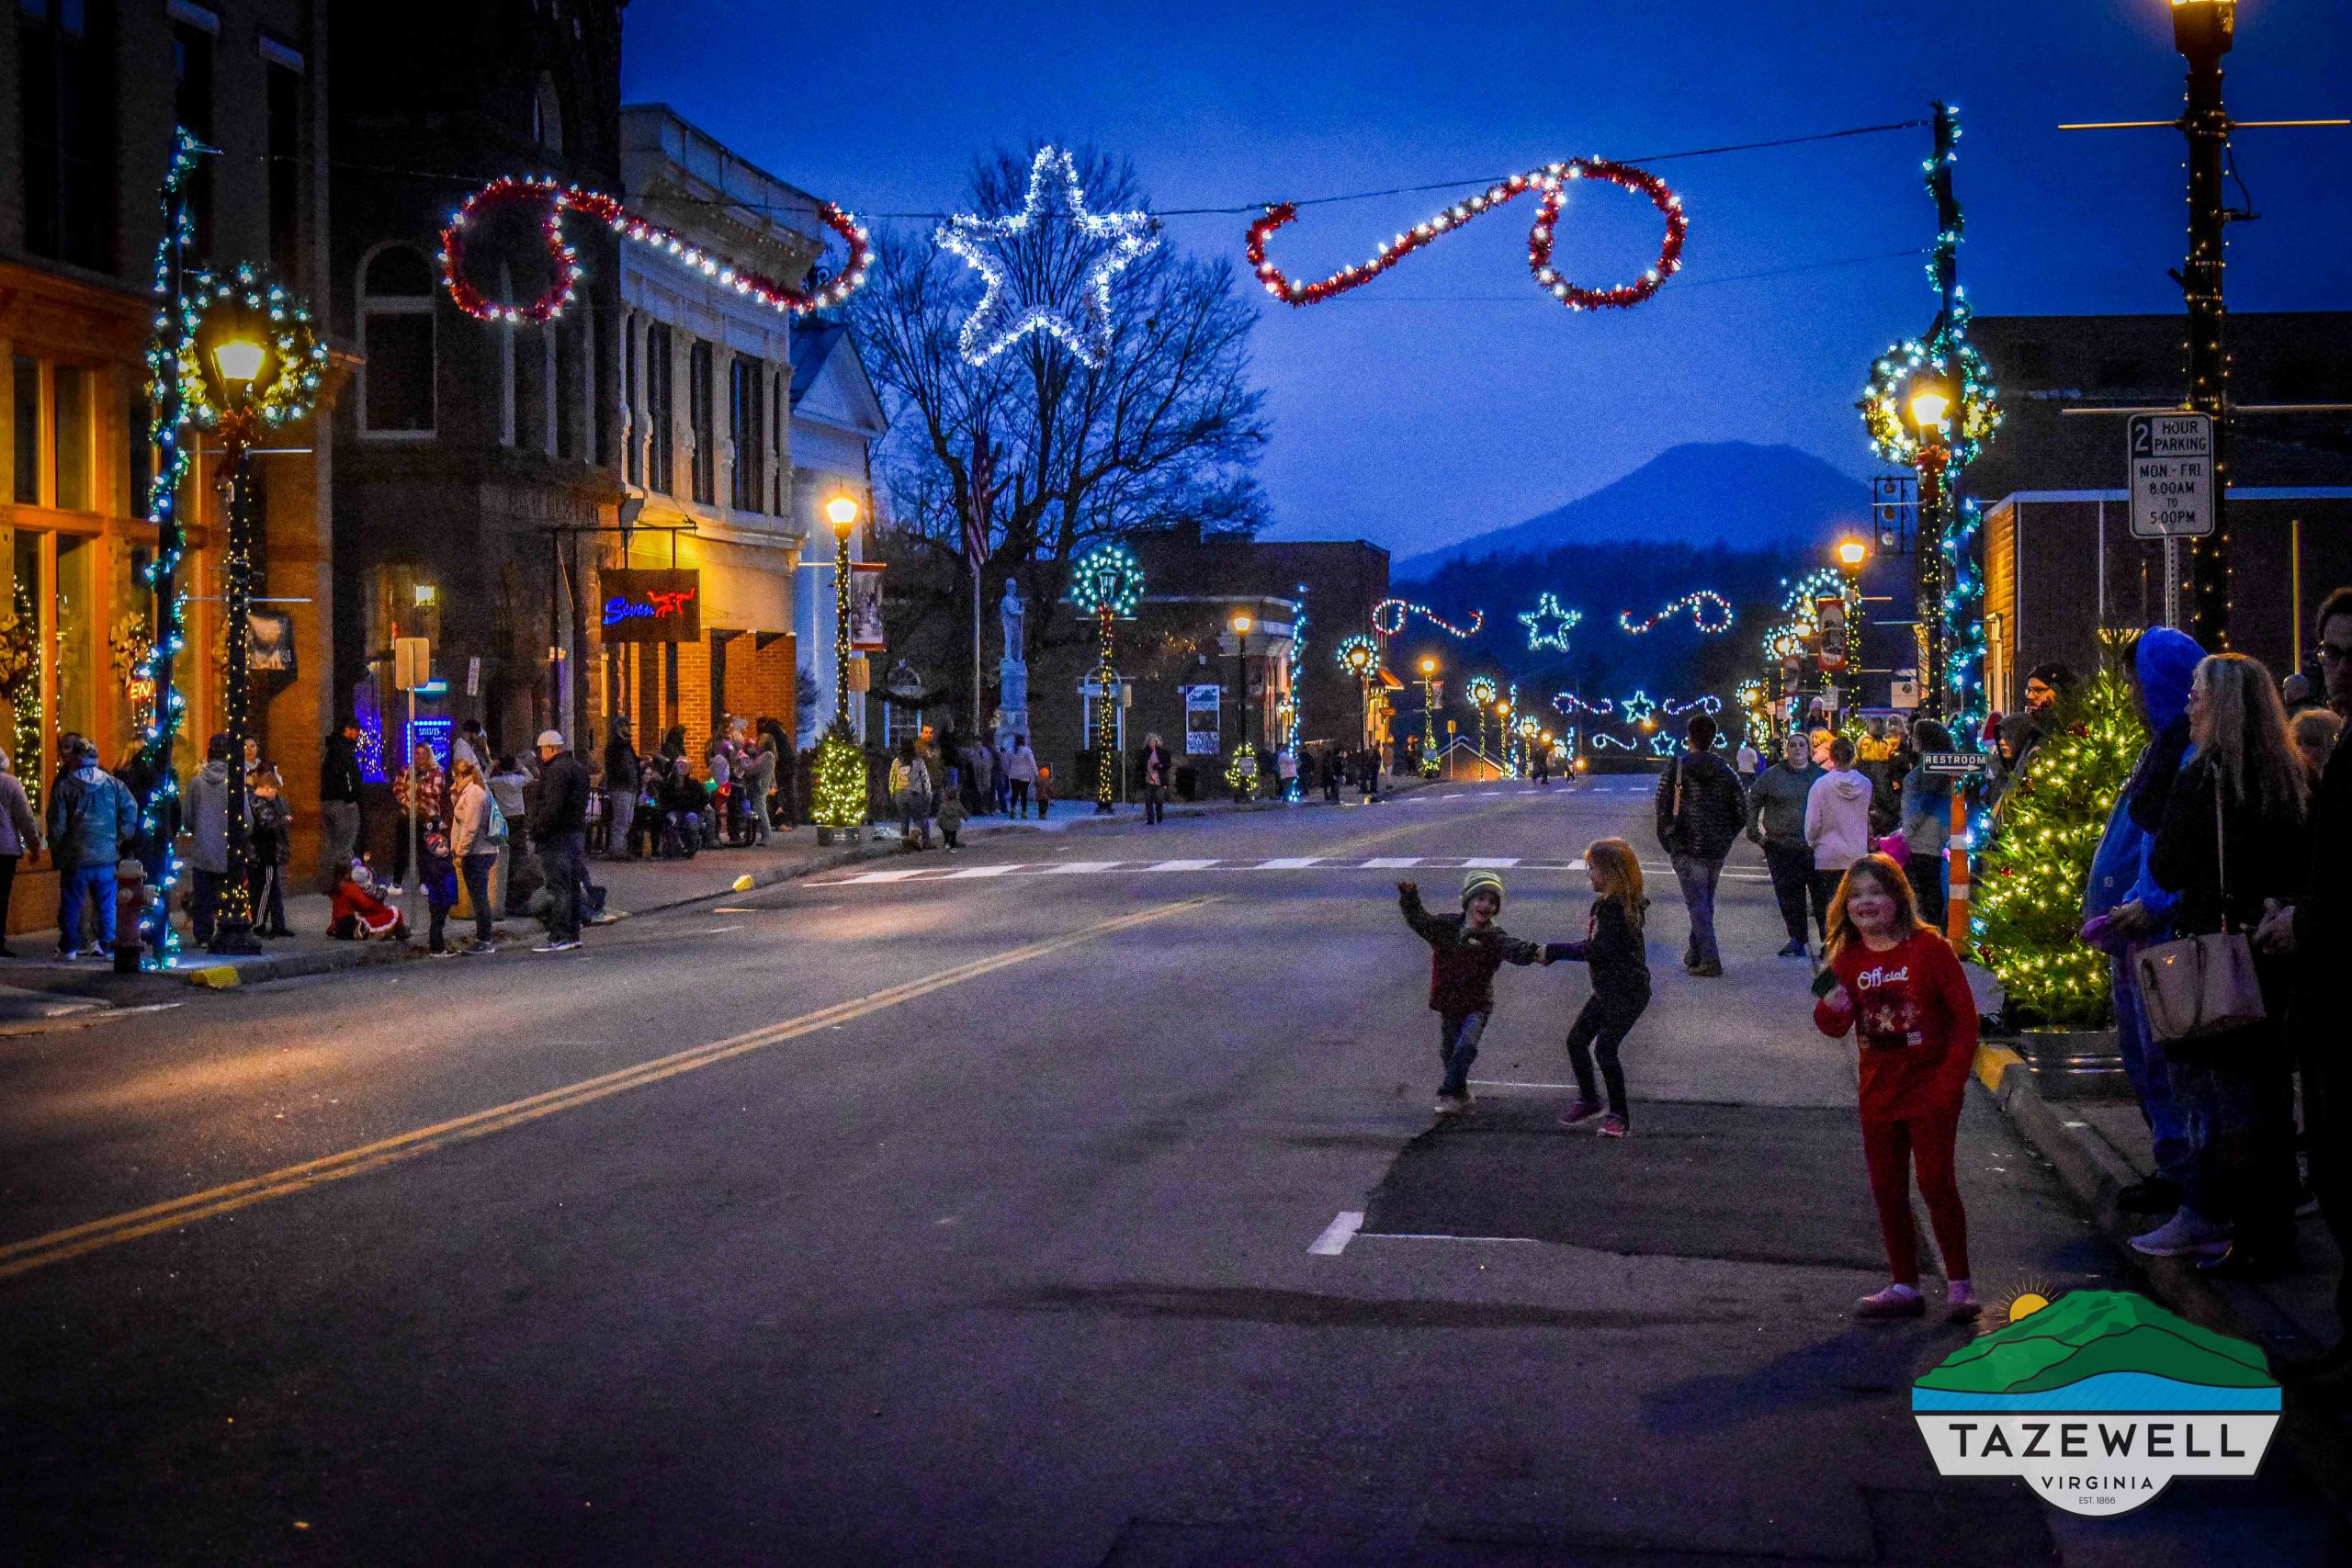 Christmas Market and Parade Held in Tazewell